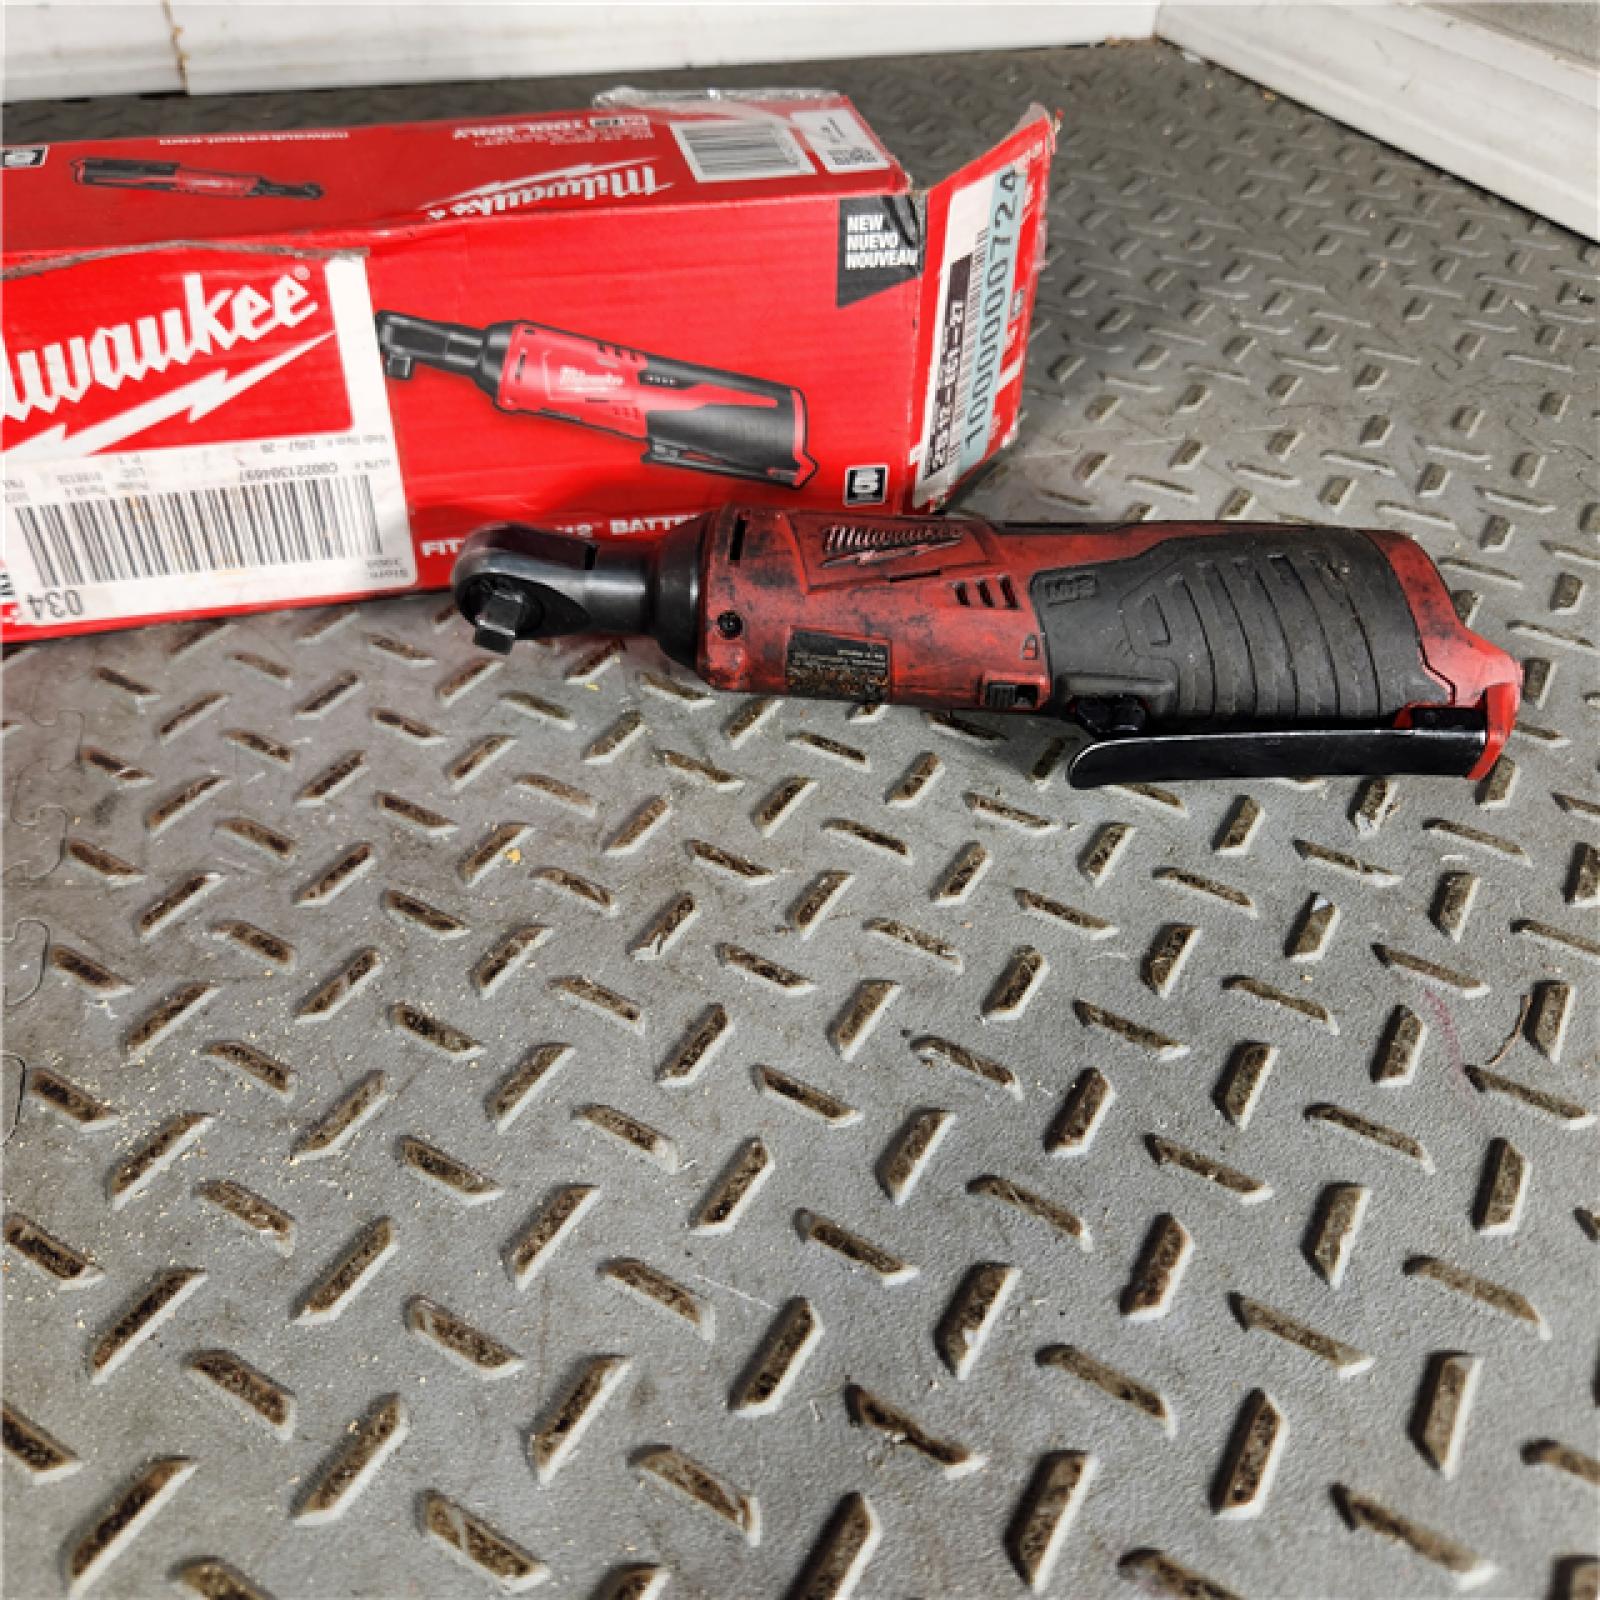 Houston location- AS-IS MWK2457-20 .38 in. M12 Cordless Ratchet Only TOOL ONLY